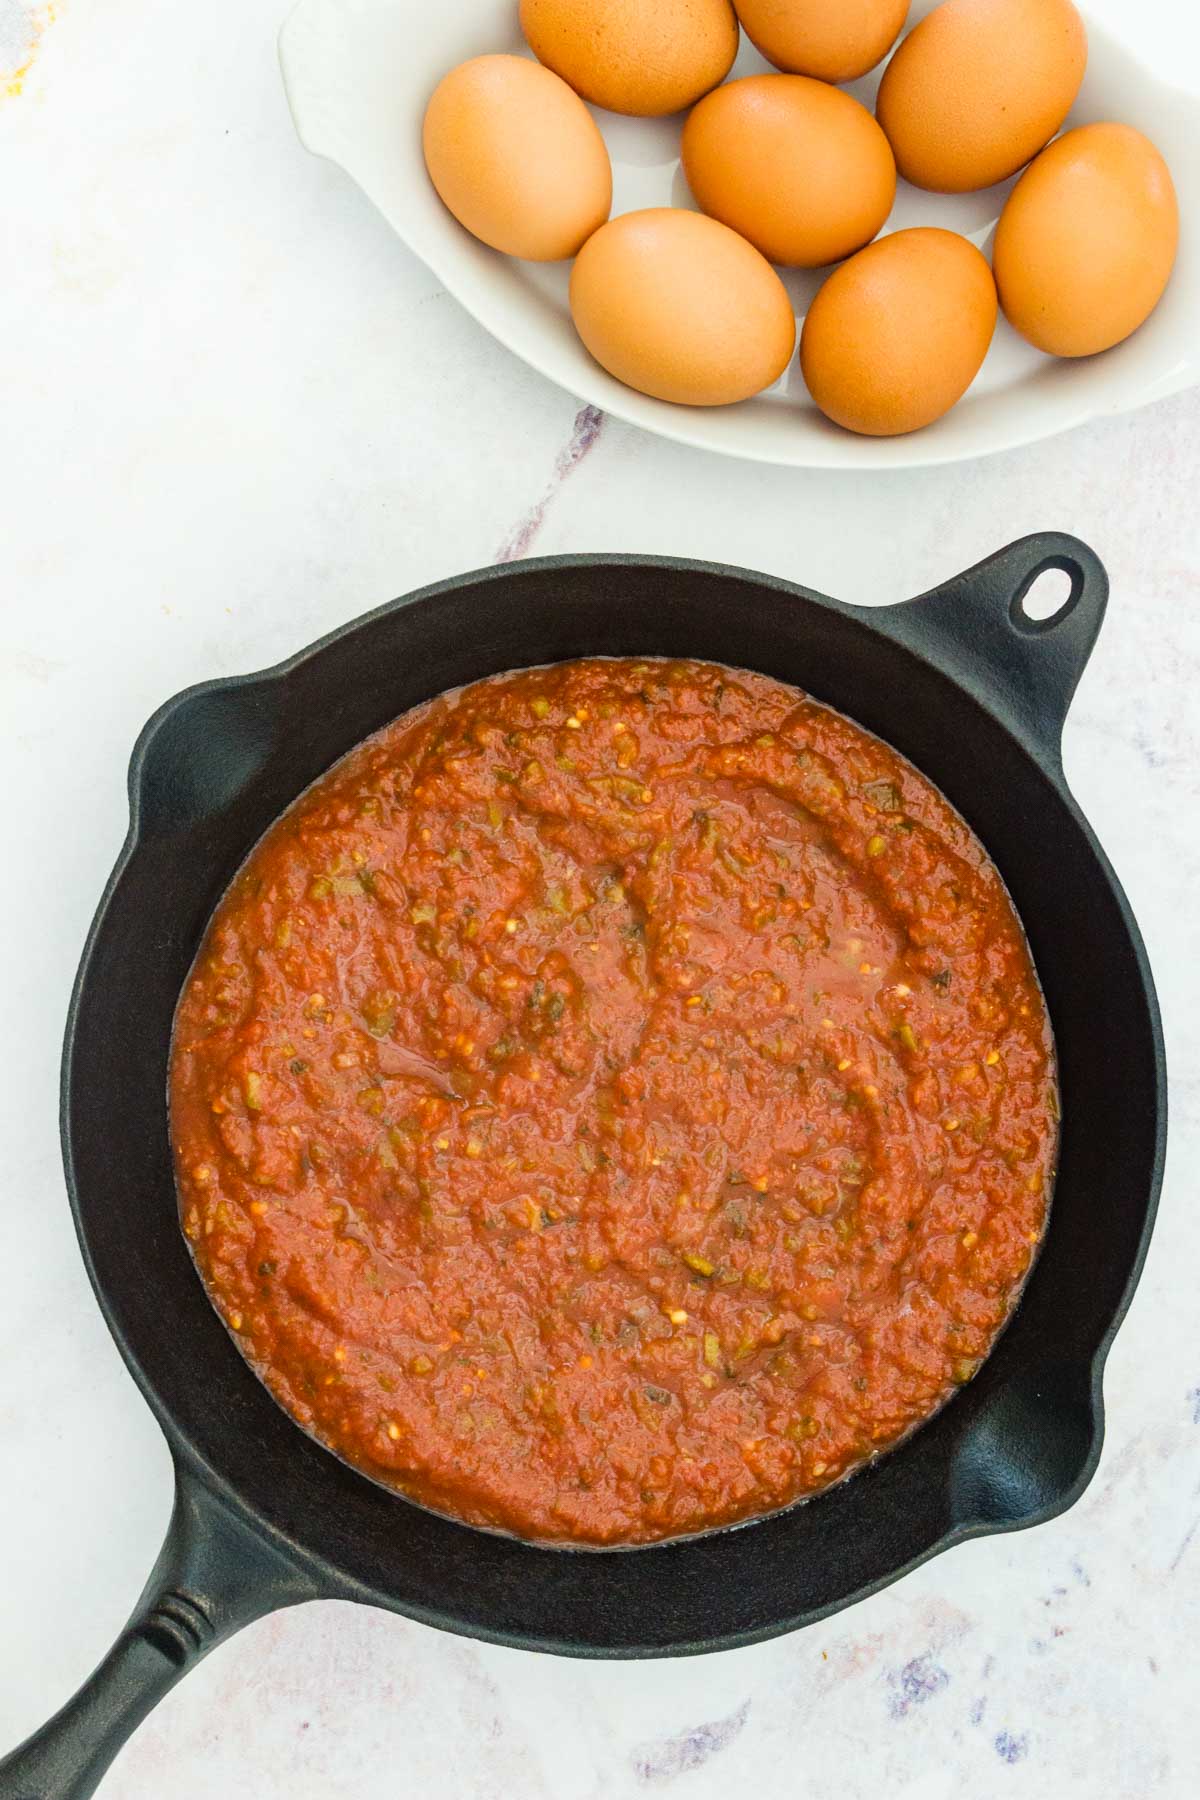 Salsa spread evenly across the bottom of a skillet next to a bowl of 8 eggs.